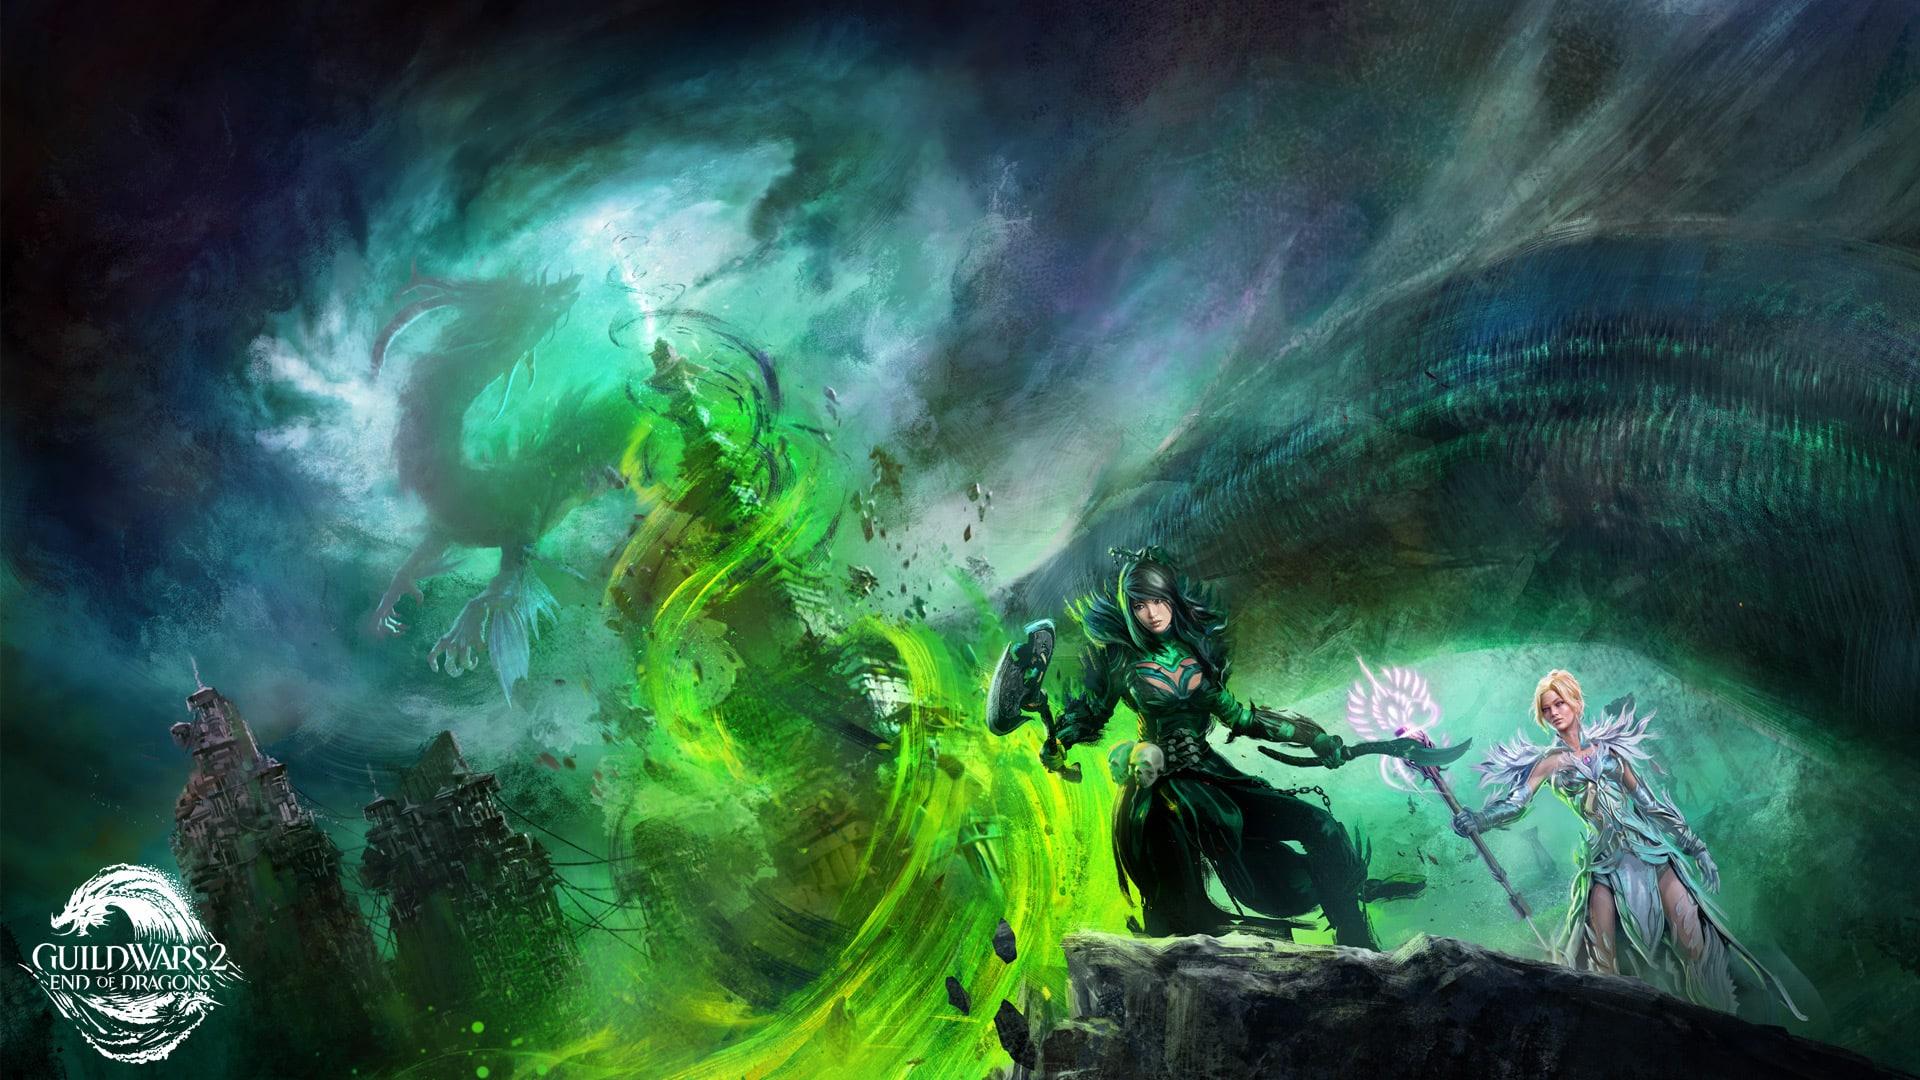 guild wars 2 end of dragons cover art